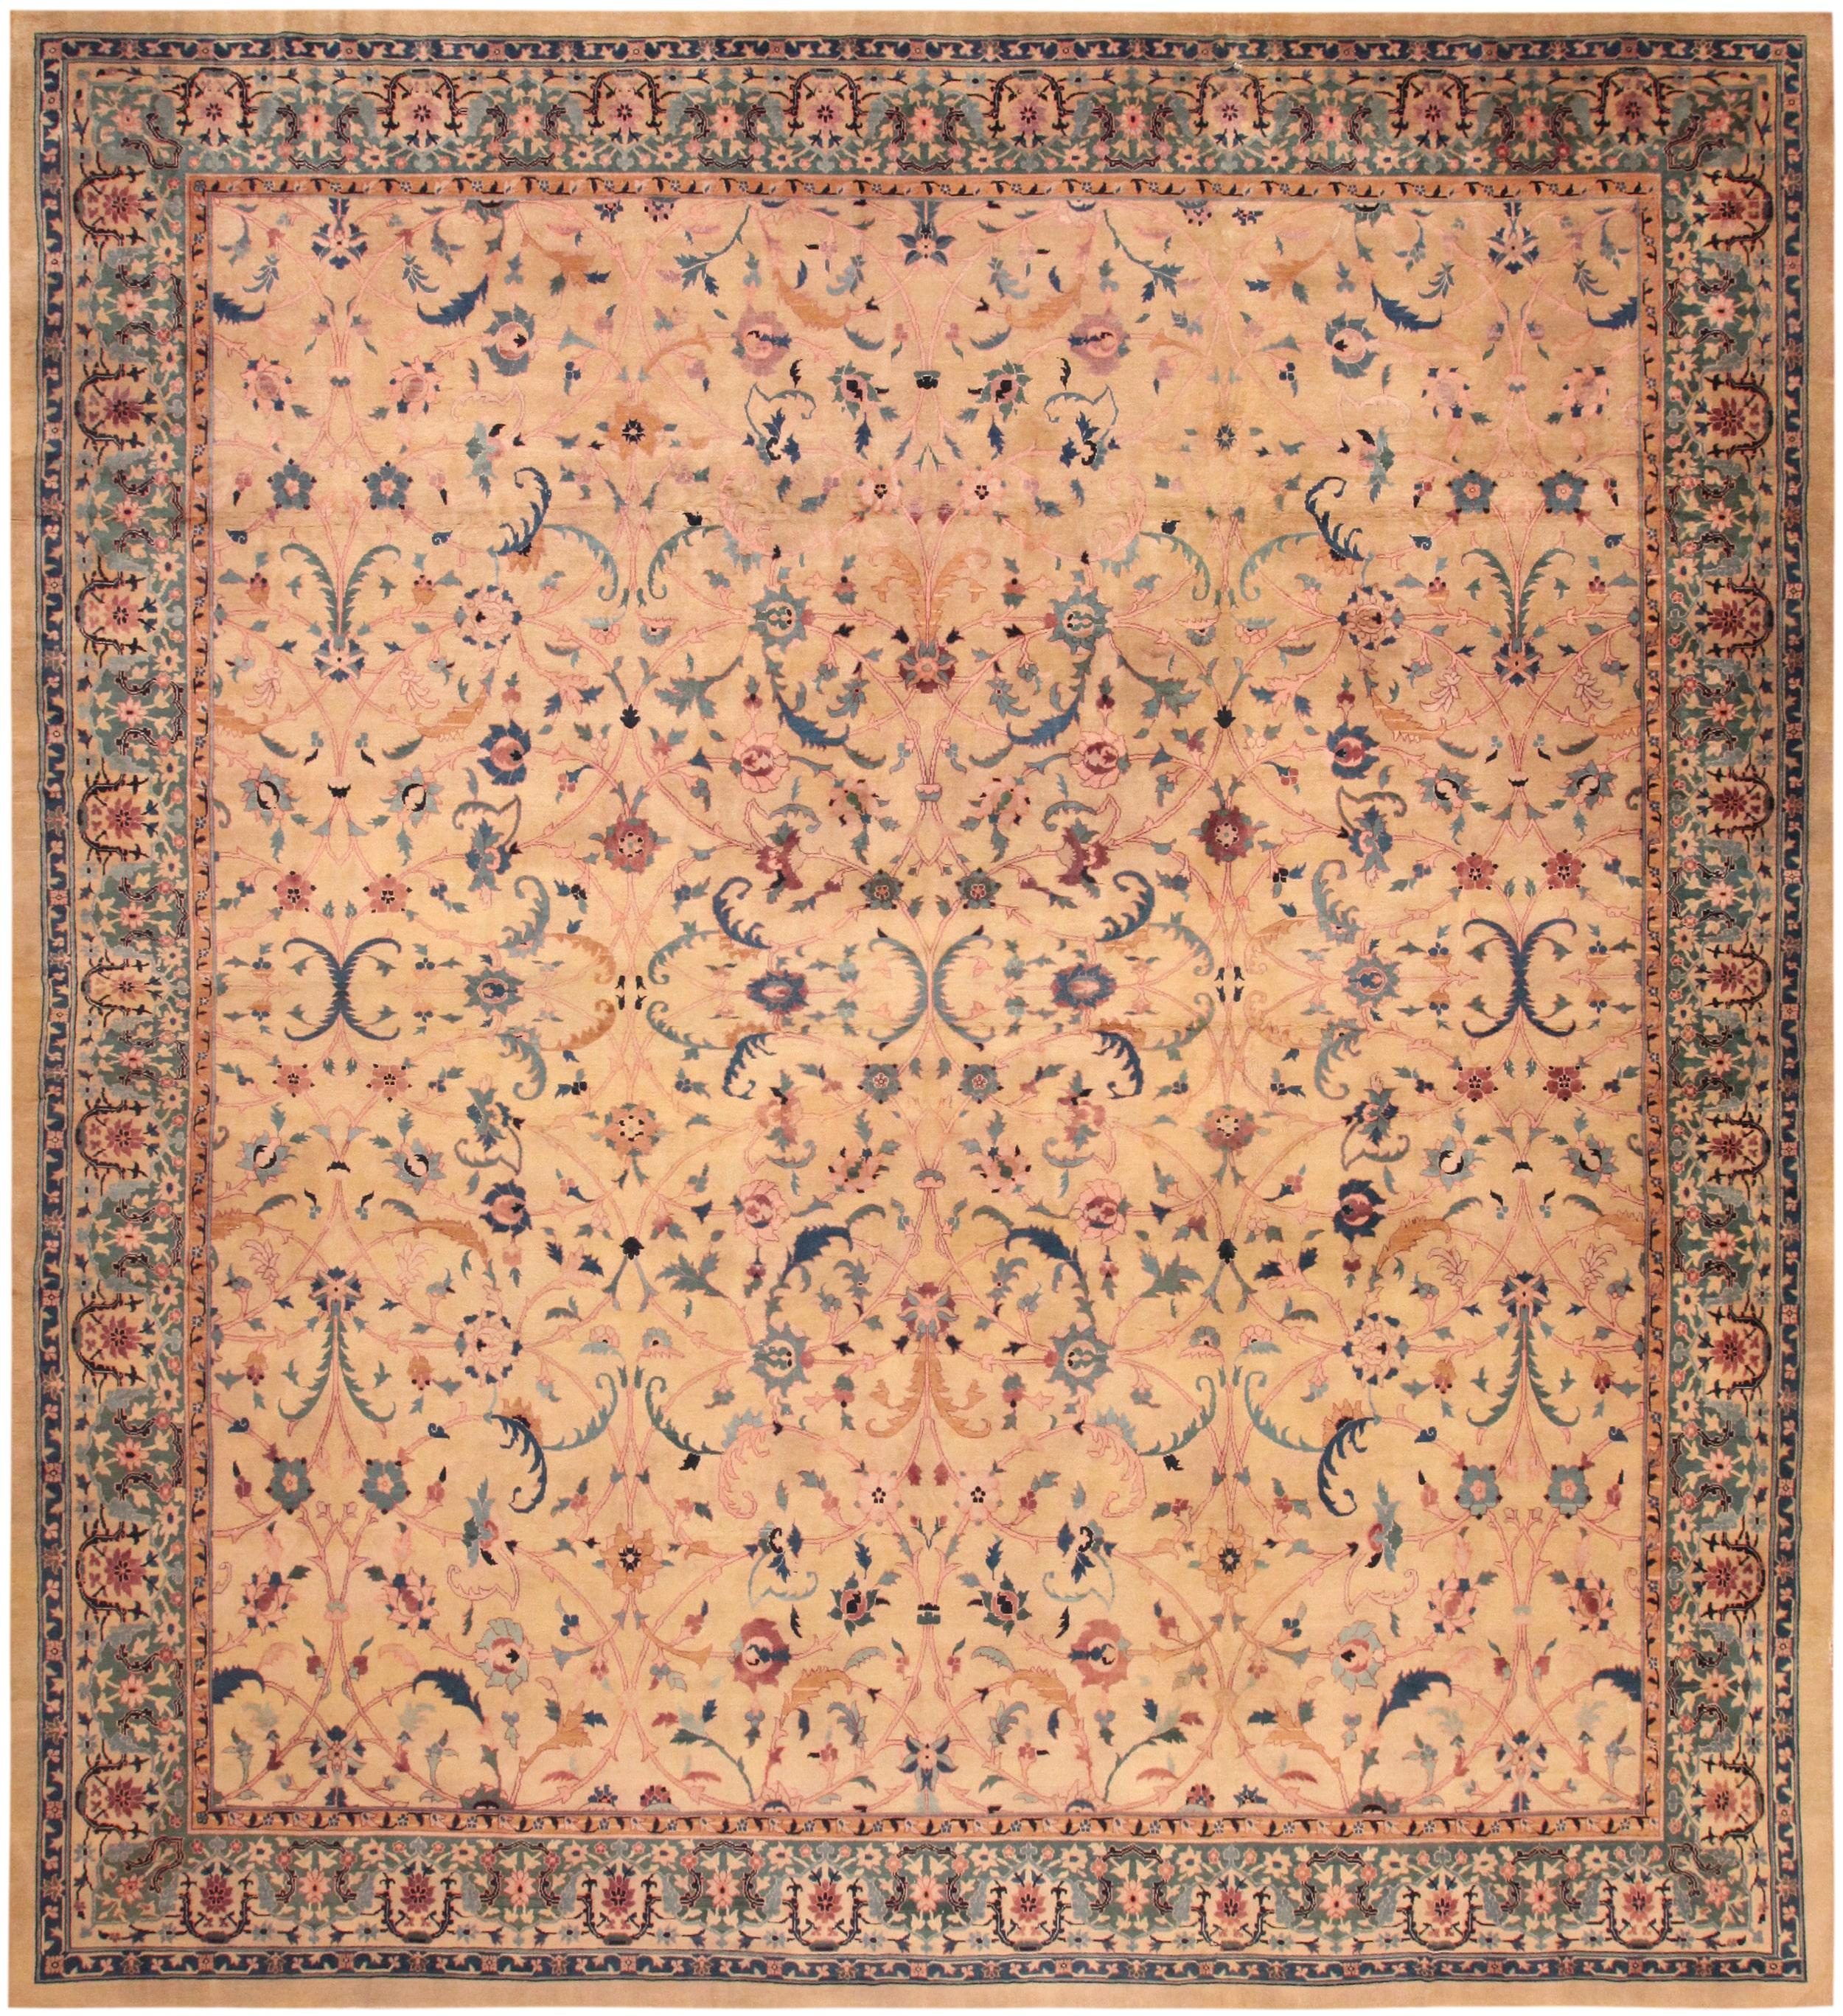 Antique Indian Agra Rug. Size: 14 ft 7 in x 15 ft 7 in